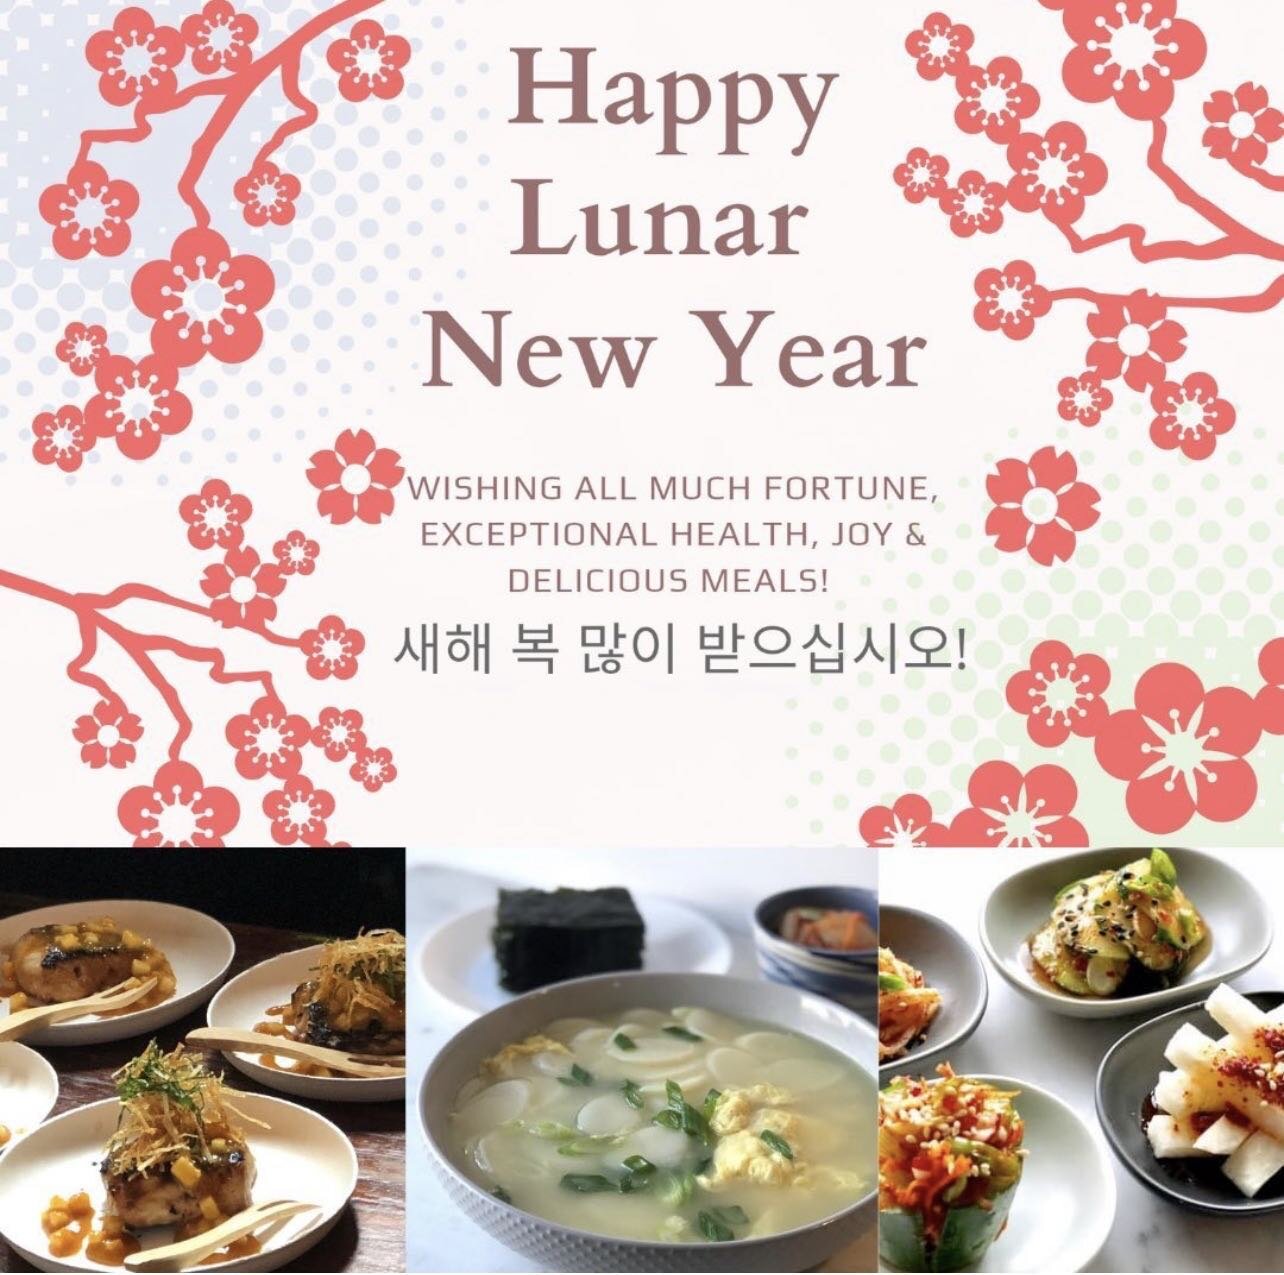 Happy Lunar New Year.

May the year of the Rabbit shower you with good luck, prosperity and courage - to thrive, to be the best you &amp; to imprint your better onto this world.

We are quietly celebrating at home, making tteok guk (rice cake soup) a